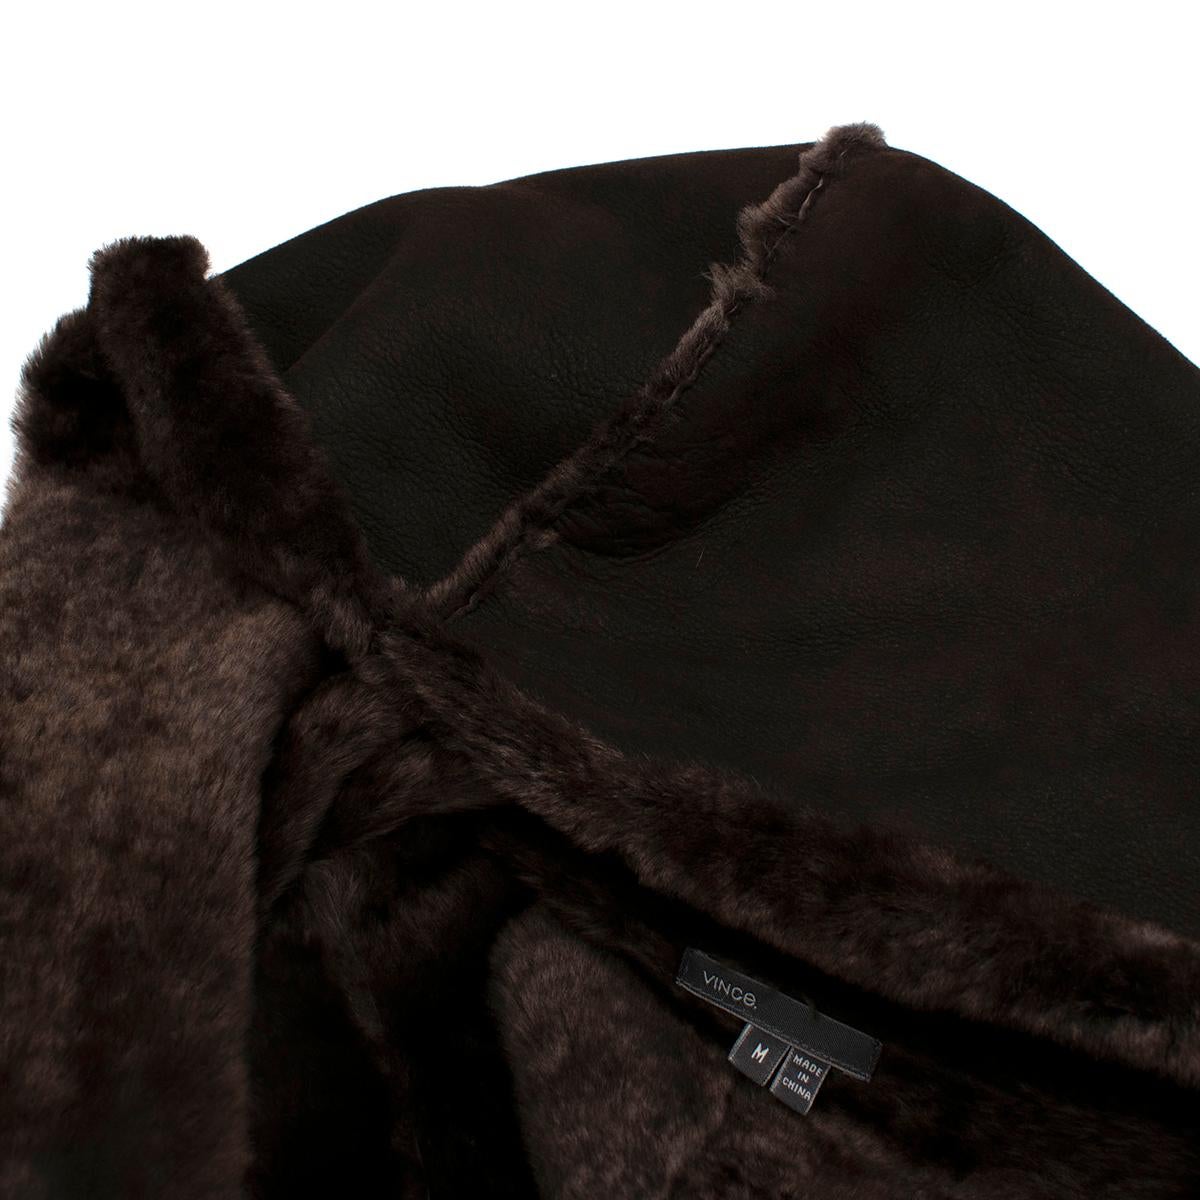 Black Vince Chocolate Brown Hooded Shearling Coat - US 8 For Sale